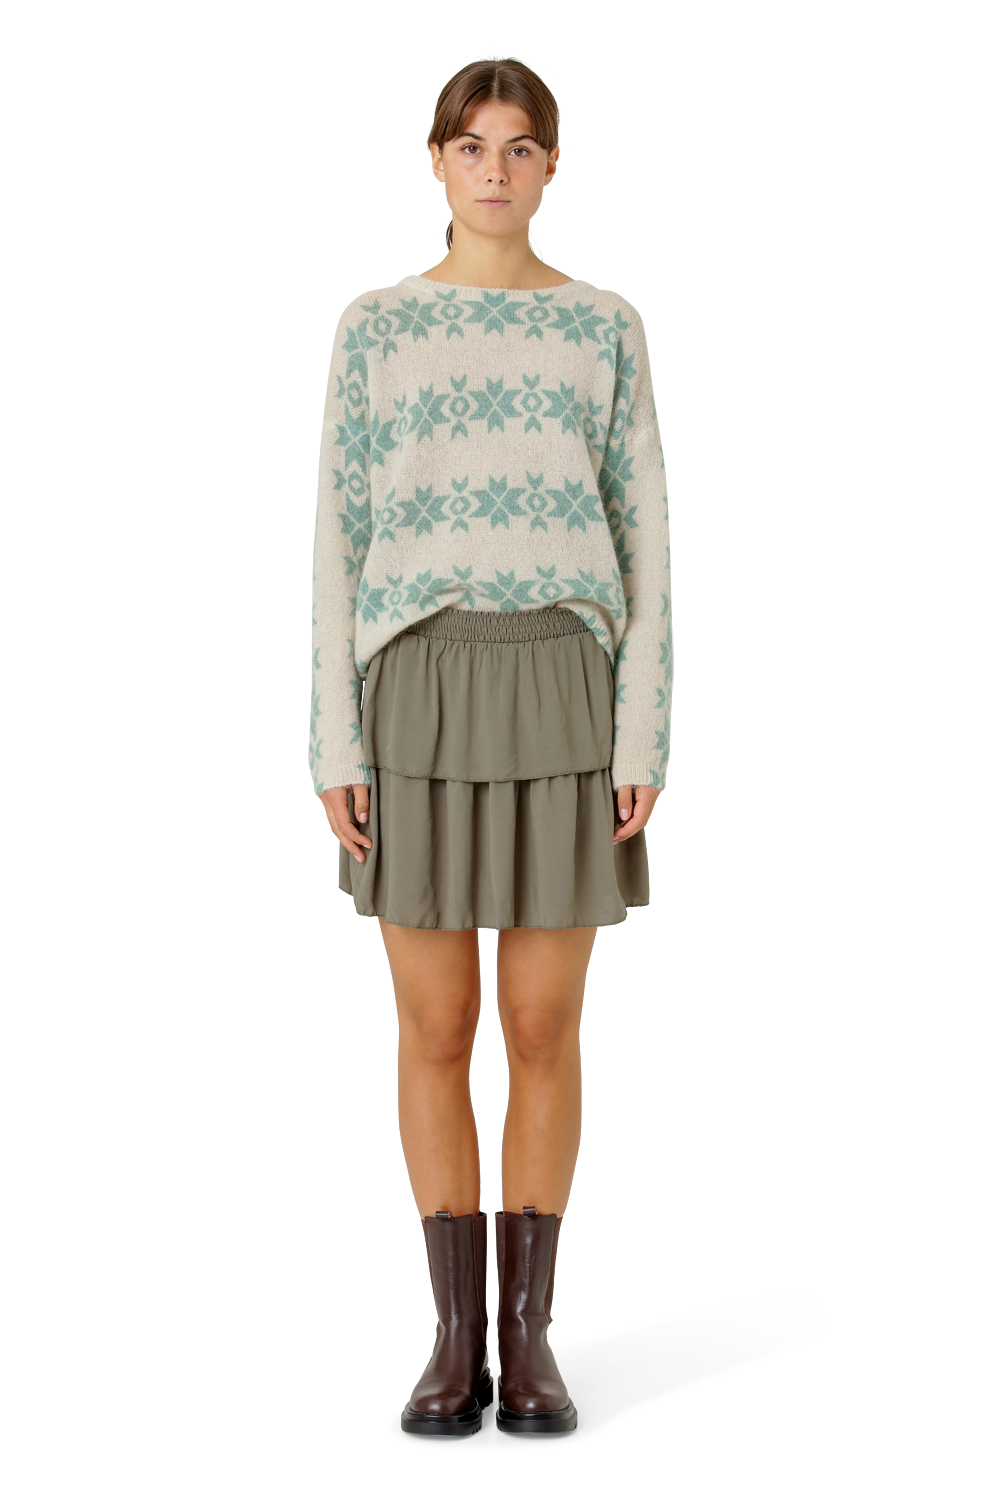 Eva Nordic Pullover Beige With Green Print - Sample